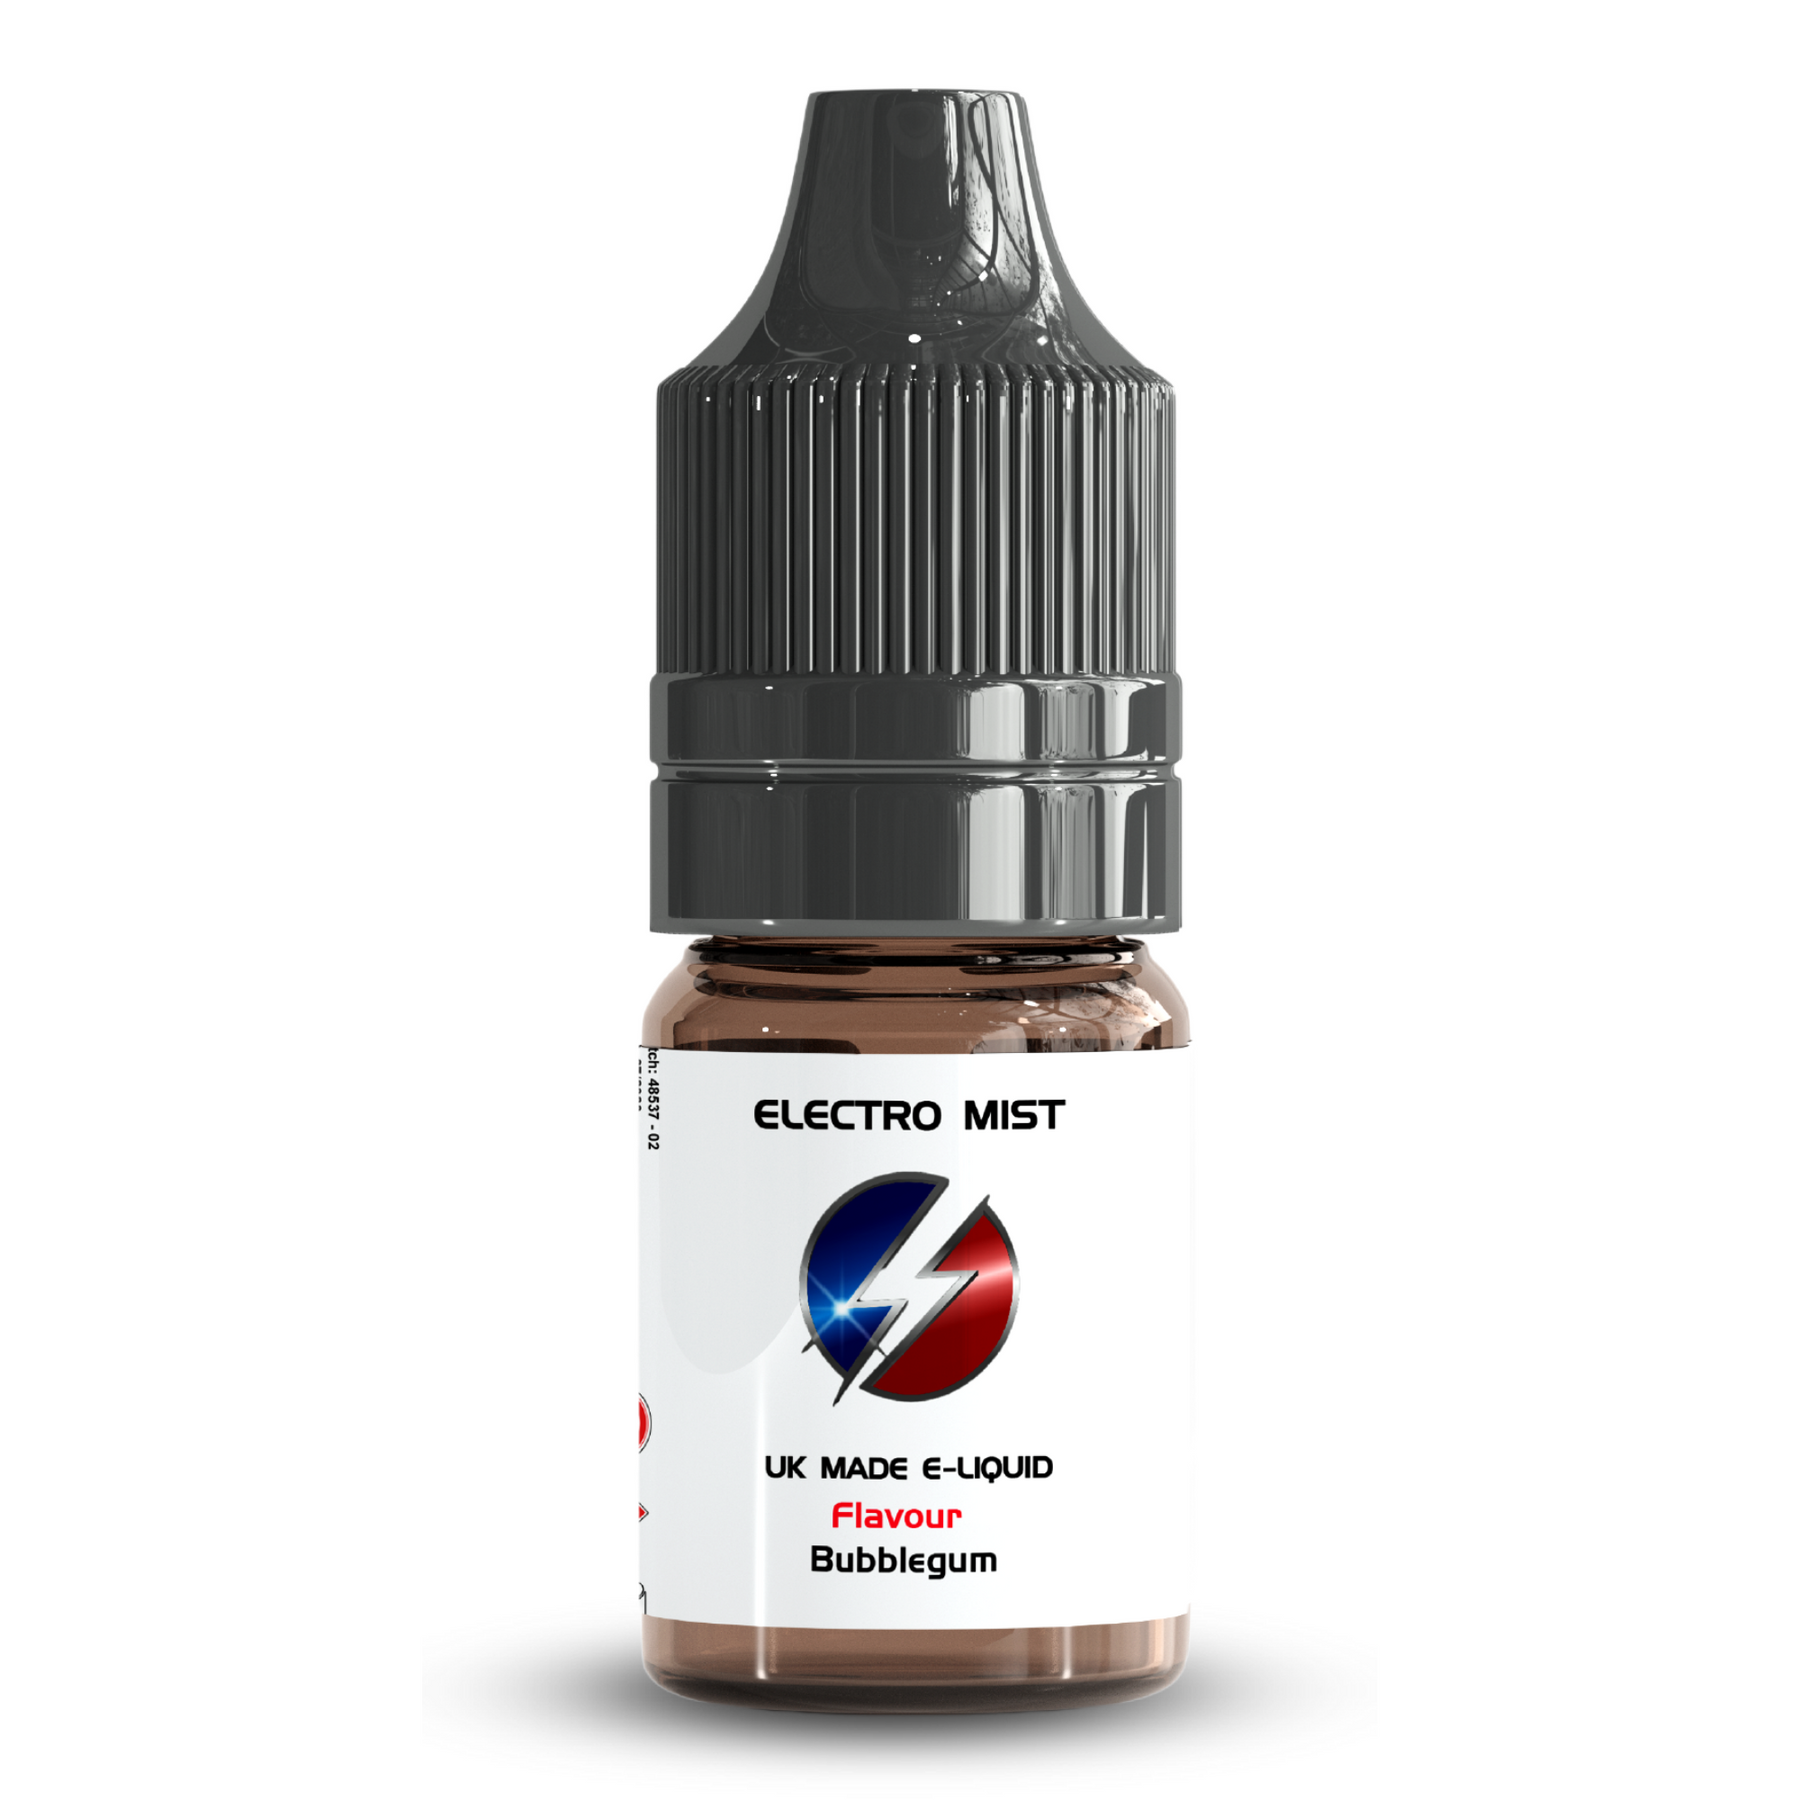 Electromist, the e-liquid brand you can trust. Get your taste buds ready for a flavour sensation, Bubblegum. Nicotine Content: 3mg/6mg/12mg. Products may contain nicotine. For over 18s Only ejuice, vape pen, eliquid, e cigarette, 10ml, vaping, cloud, PG, VG, 60/40, vape liquid, Flavour